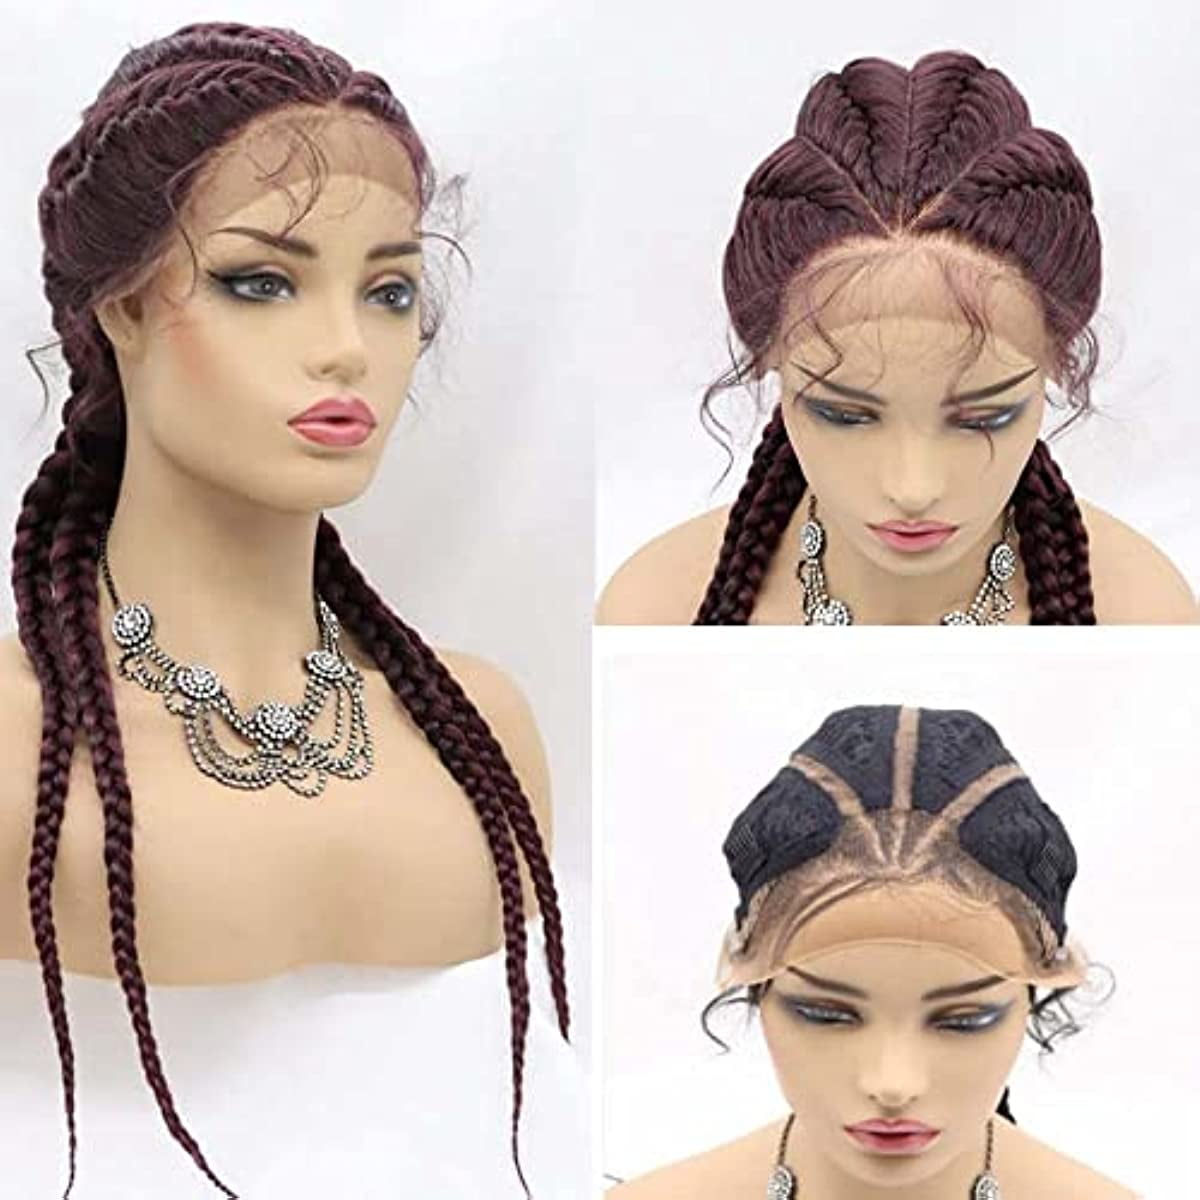 5 Braids Wig for Women Lace Front Wig Synthetic Braid Wigs With Baby Hair  Heat Resistant Fiber Makeup Daily Wear Wigs 24 Inches #1B